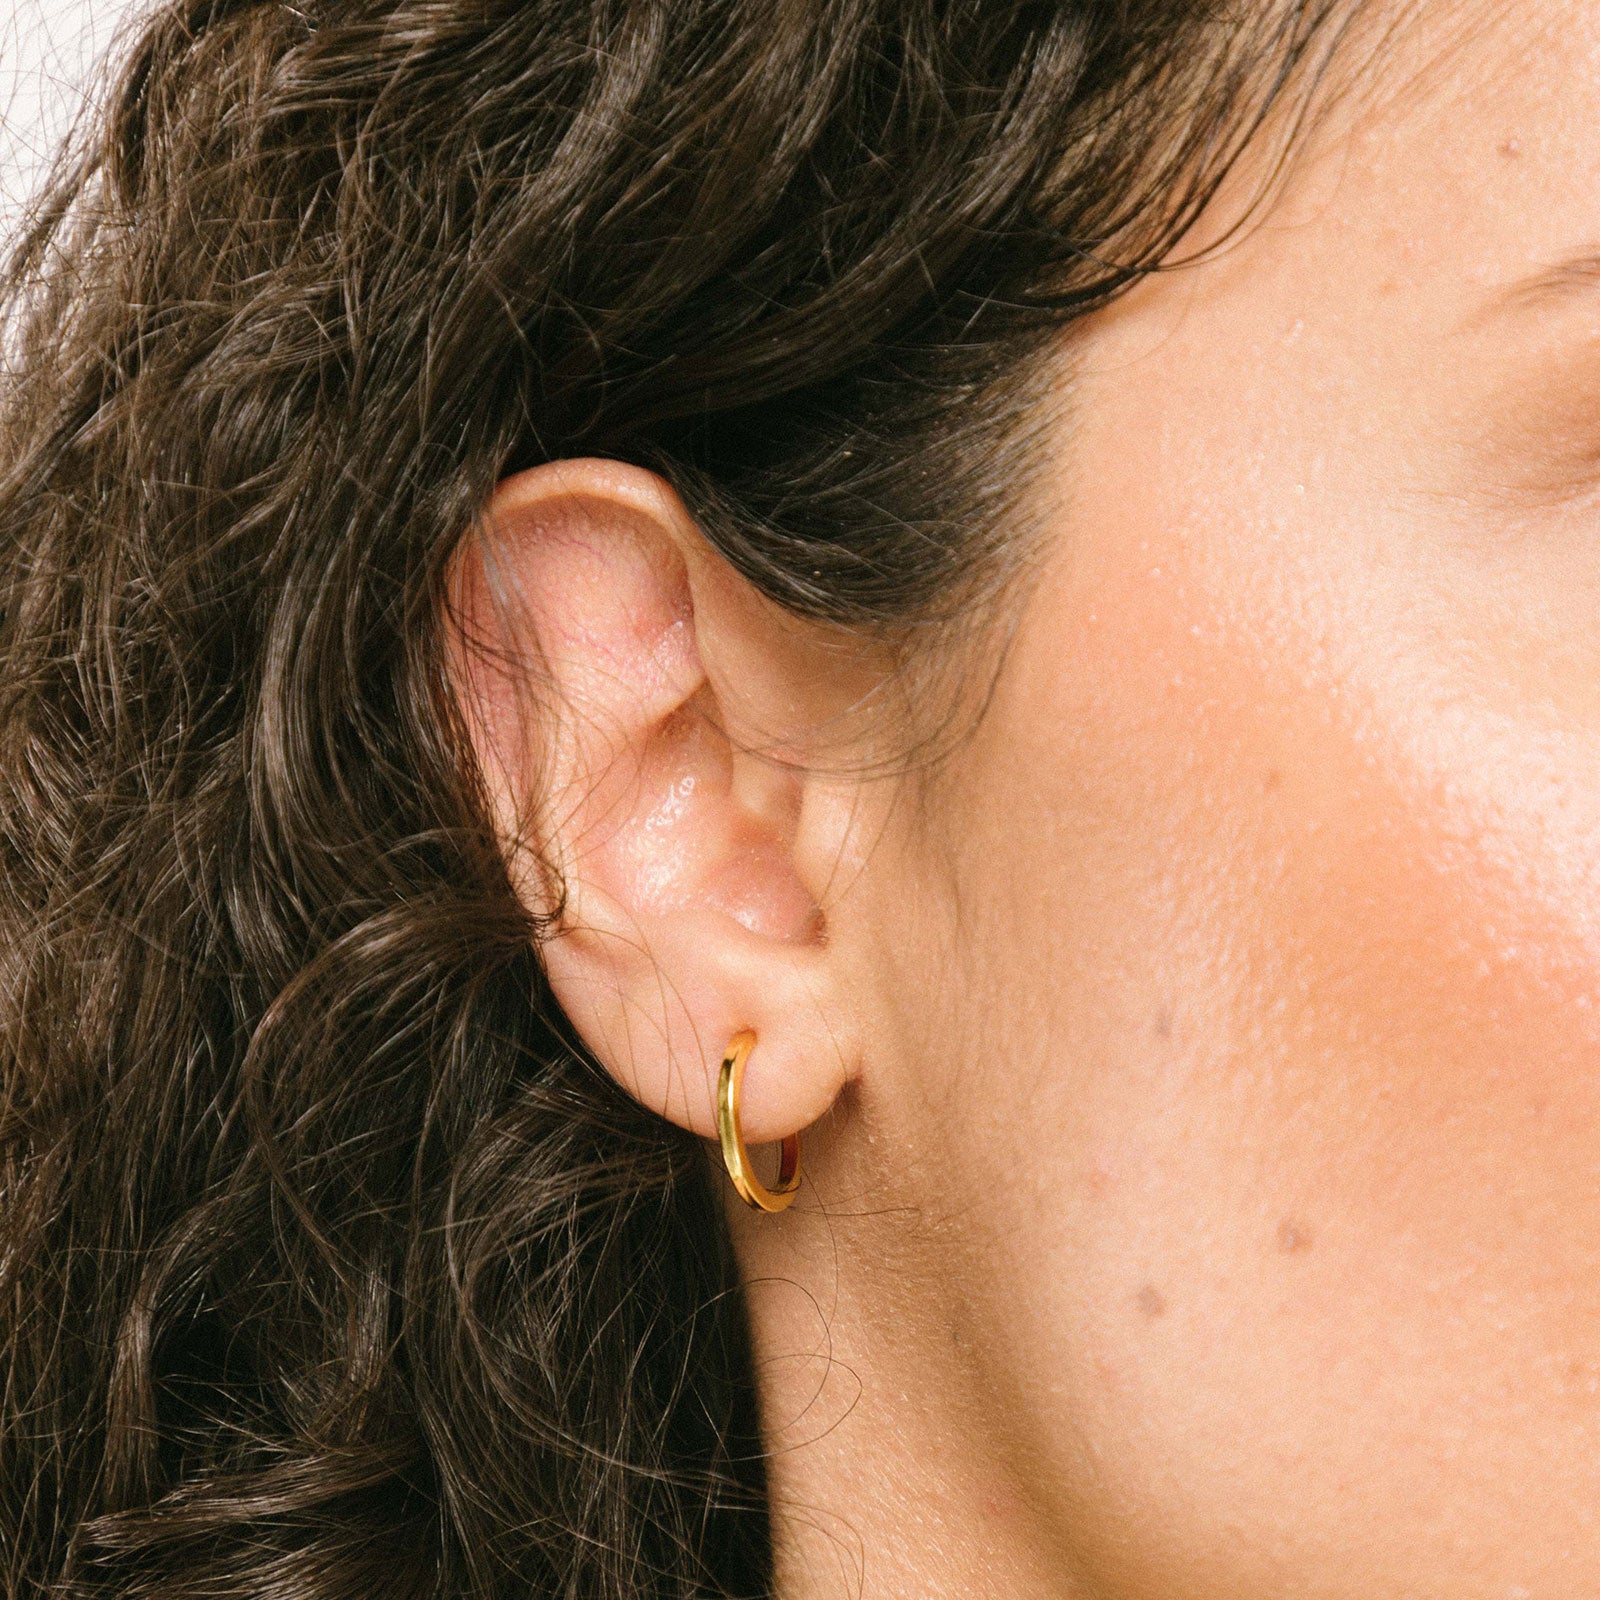 A model wearing the Mini Hoop Clip-On Earrings feature a sliding spring closure and are best suited for those with smaller or thinner ear lobes. On average, each pair can be comfortably worn for up to 4 hours, and provide a very secure hold that automatically adjusts to the ear thickness for a perfect fit. Crafted with stainless steel, each pair is sold individually.